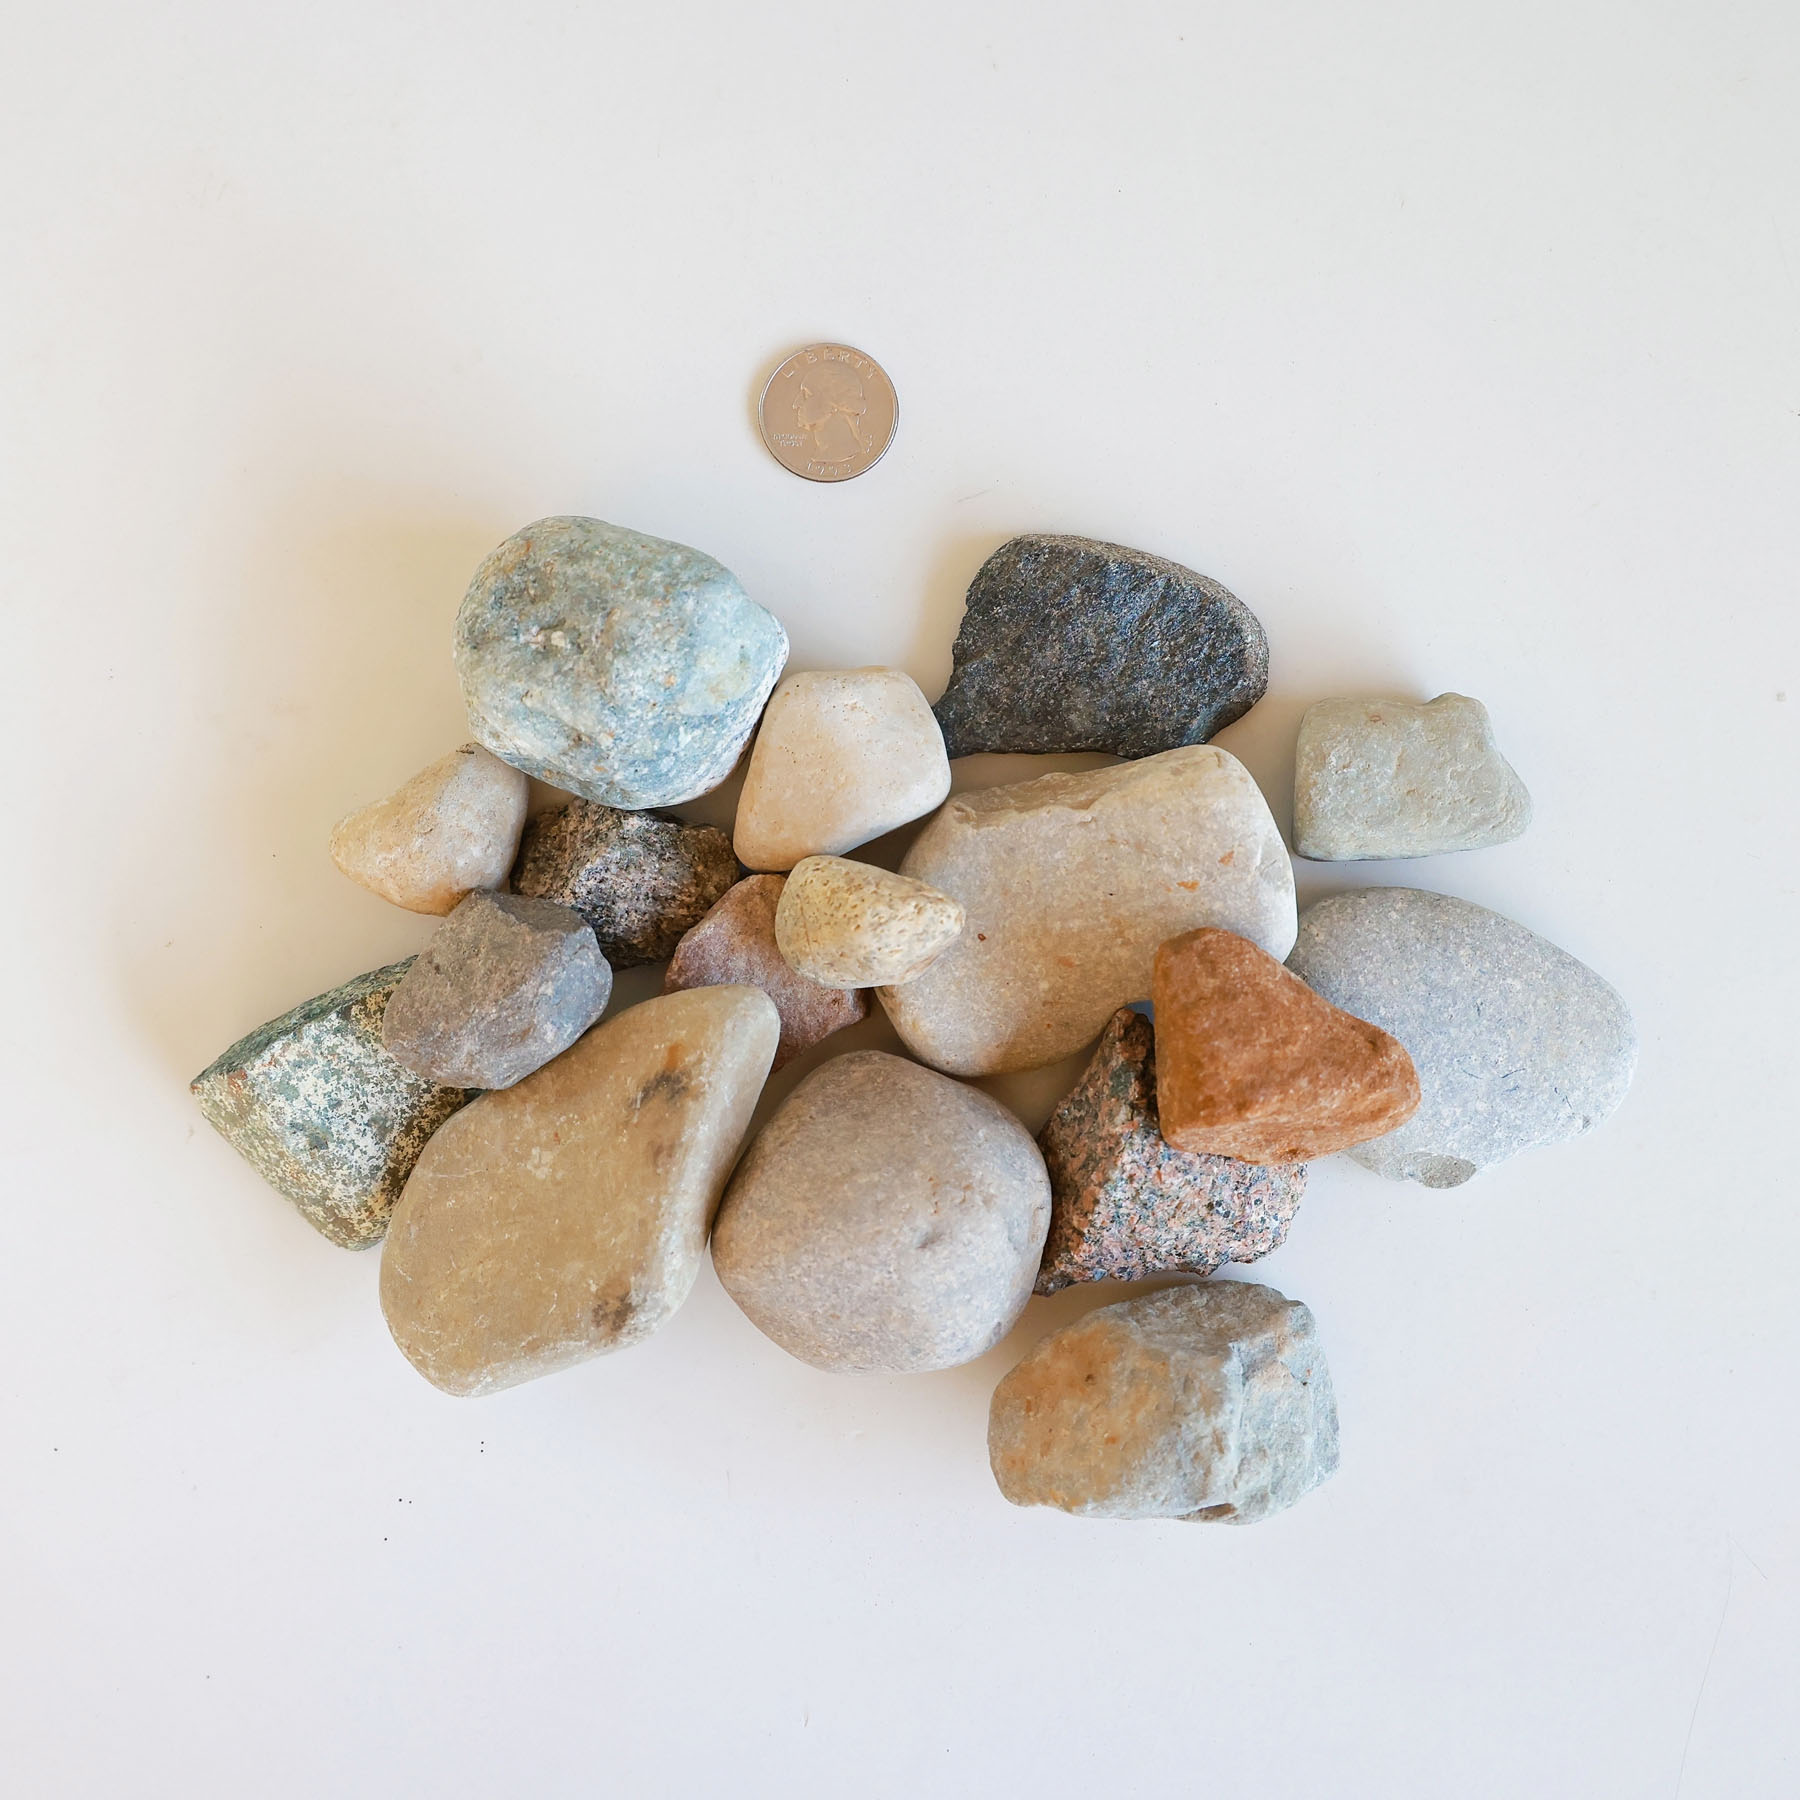 River rocks online store: click to buy extra large river rock online!